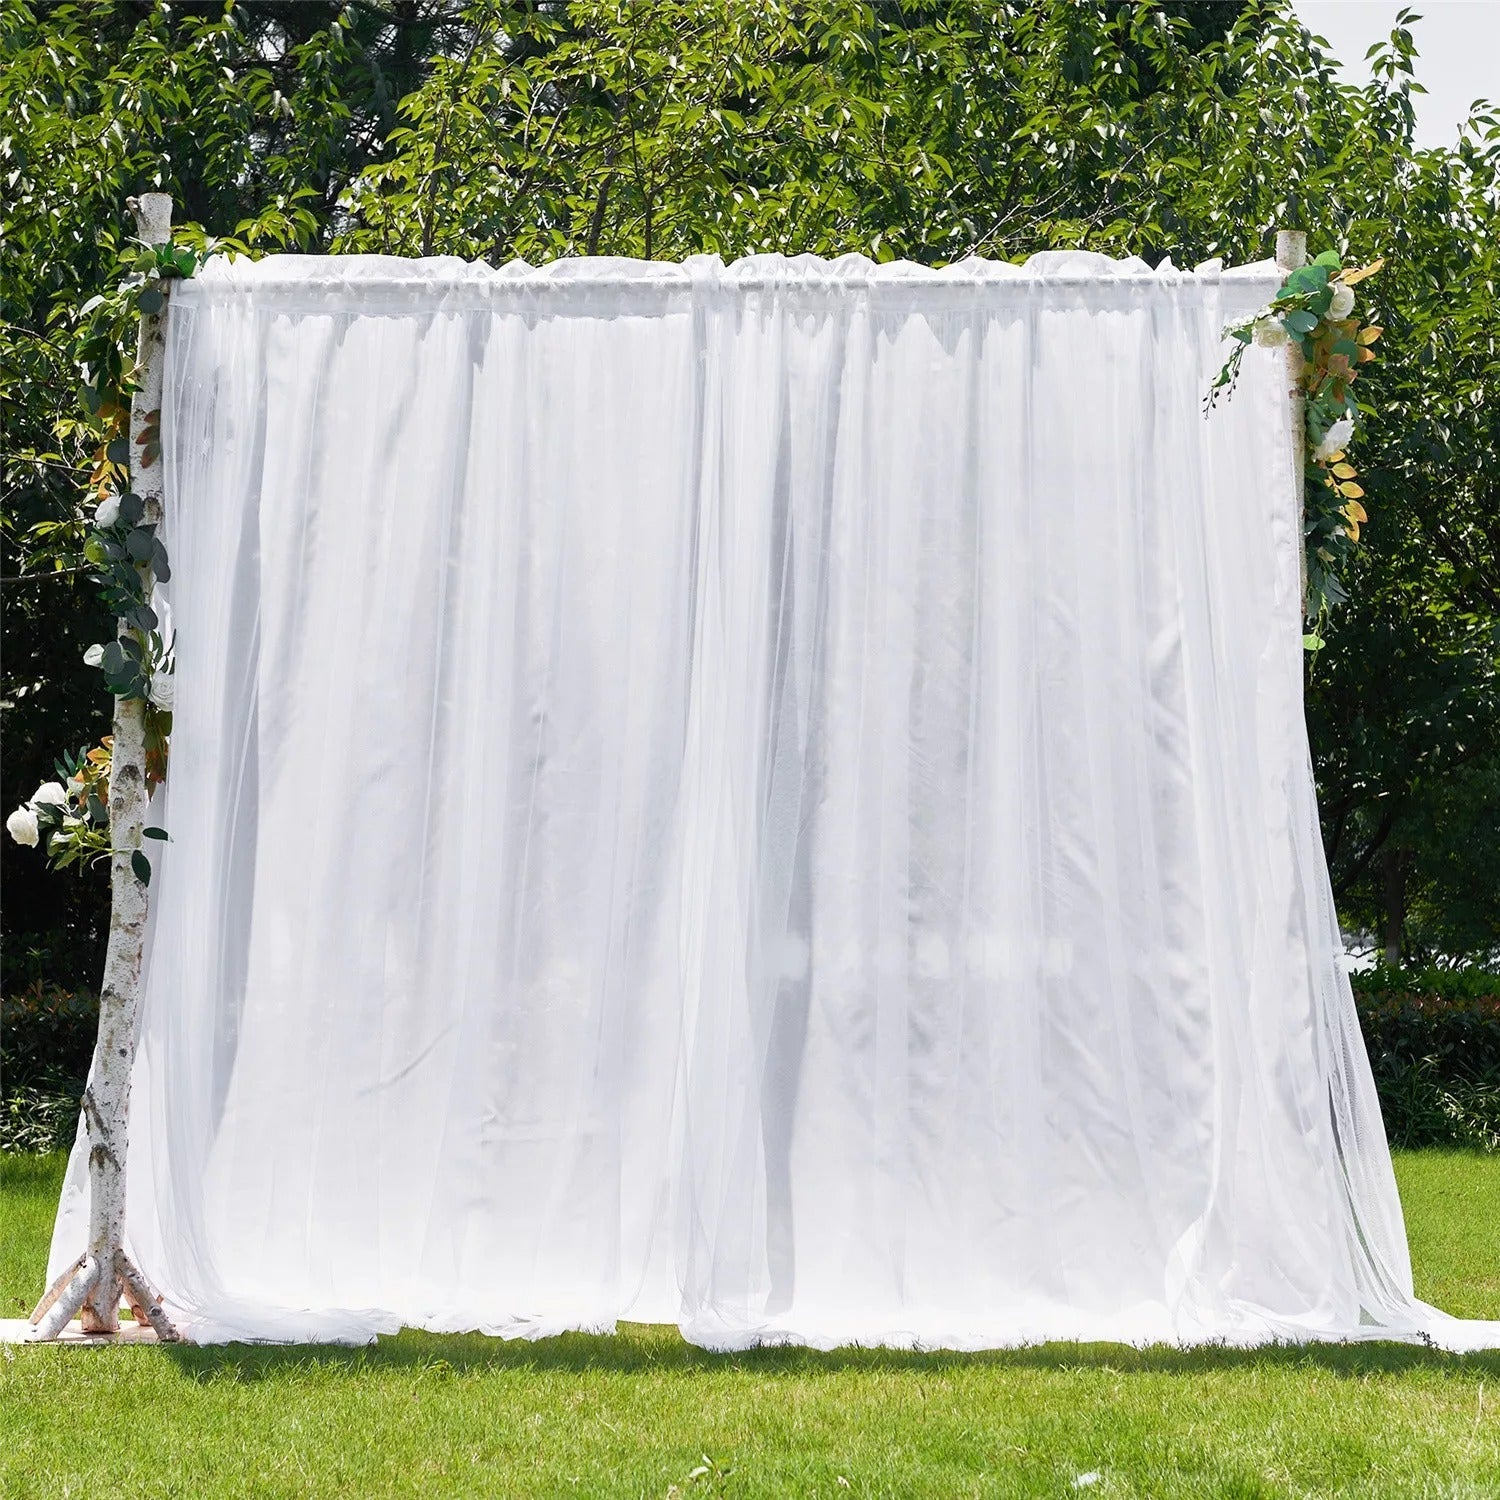 Rod Pocket Privacy Decorative Outdoor Sheer Voile Curtains For Patio, Gazebo, Pergola And Porch 2 Panels KGORGE Store